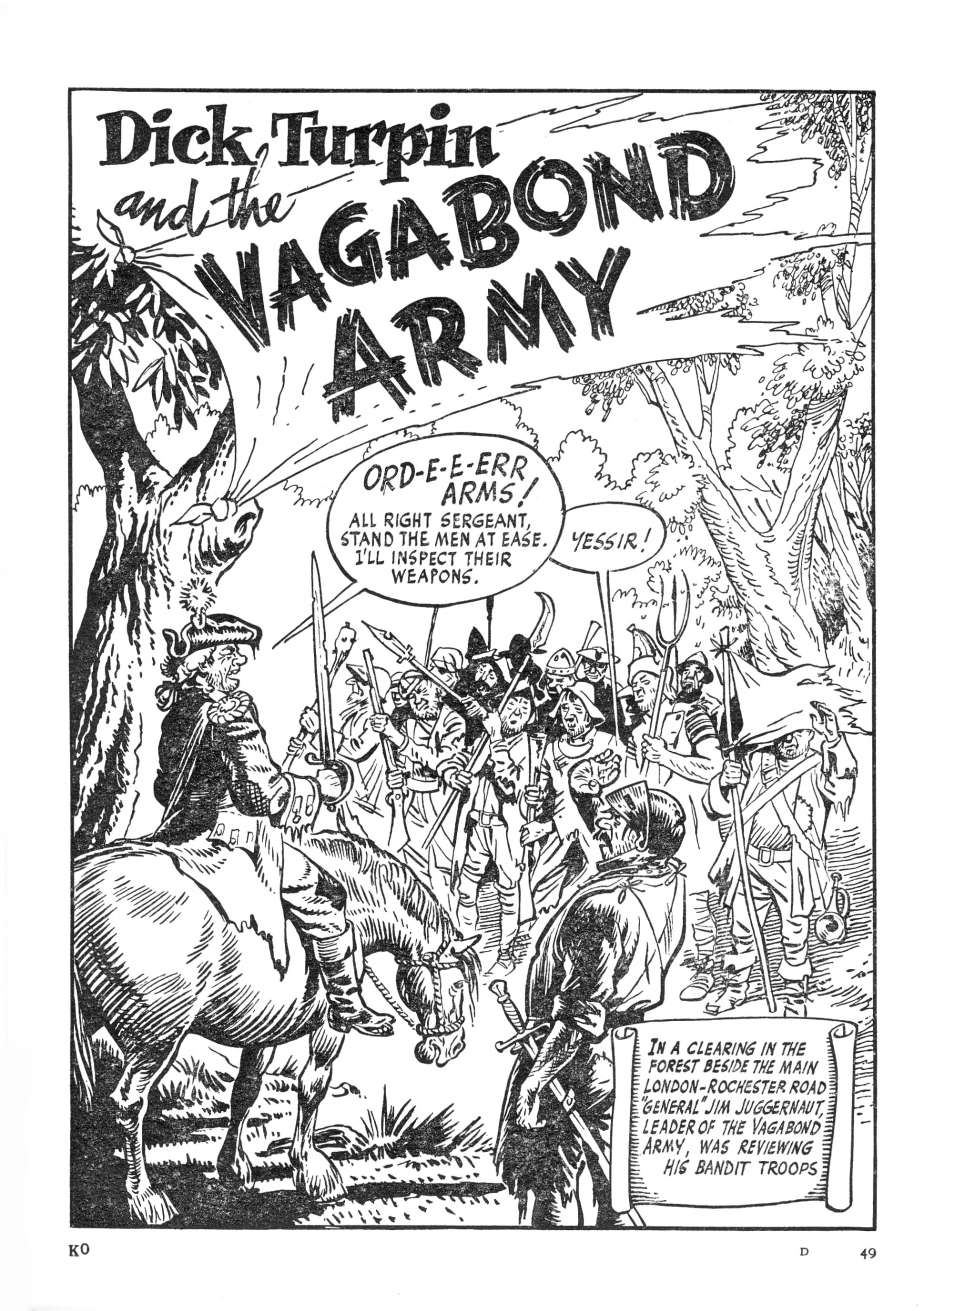 Book Cover For Dick Turpin & the Vagabond Army From Knockout Fun Book 1954